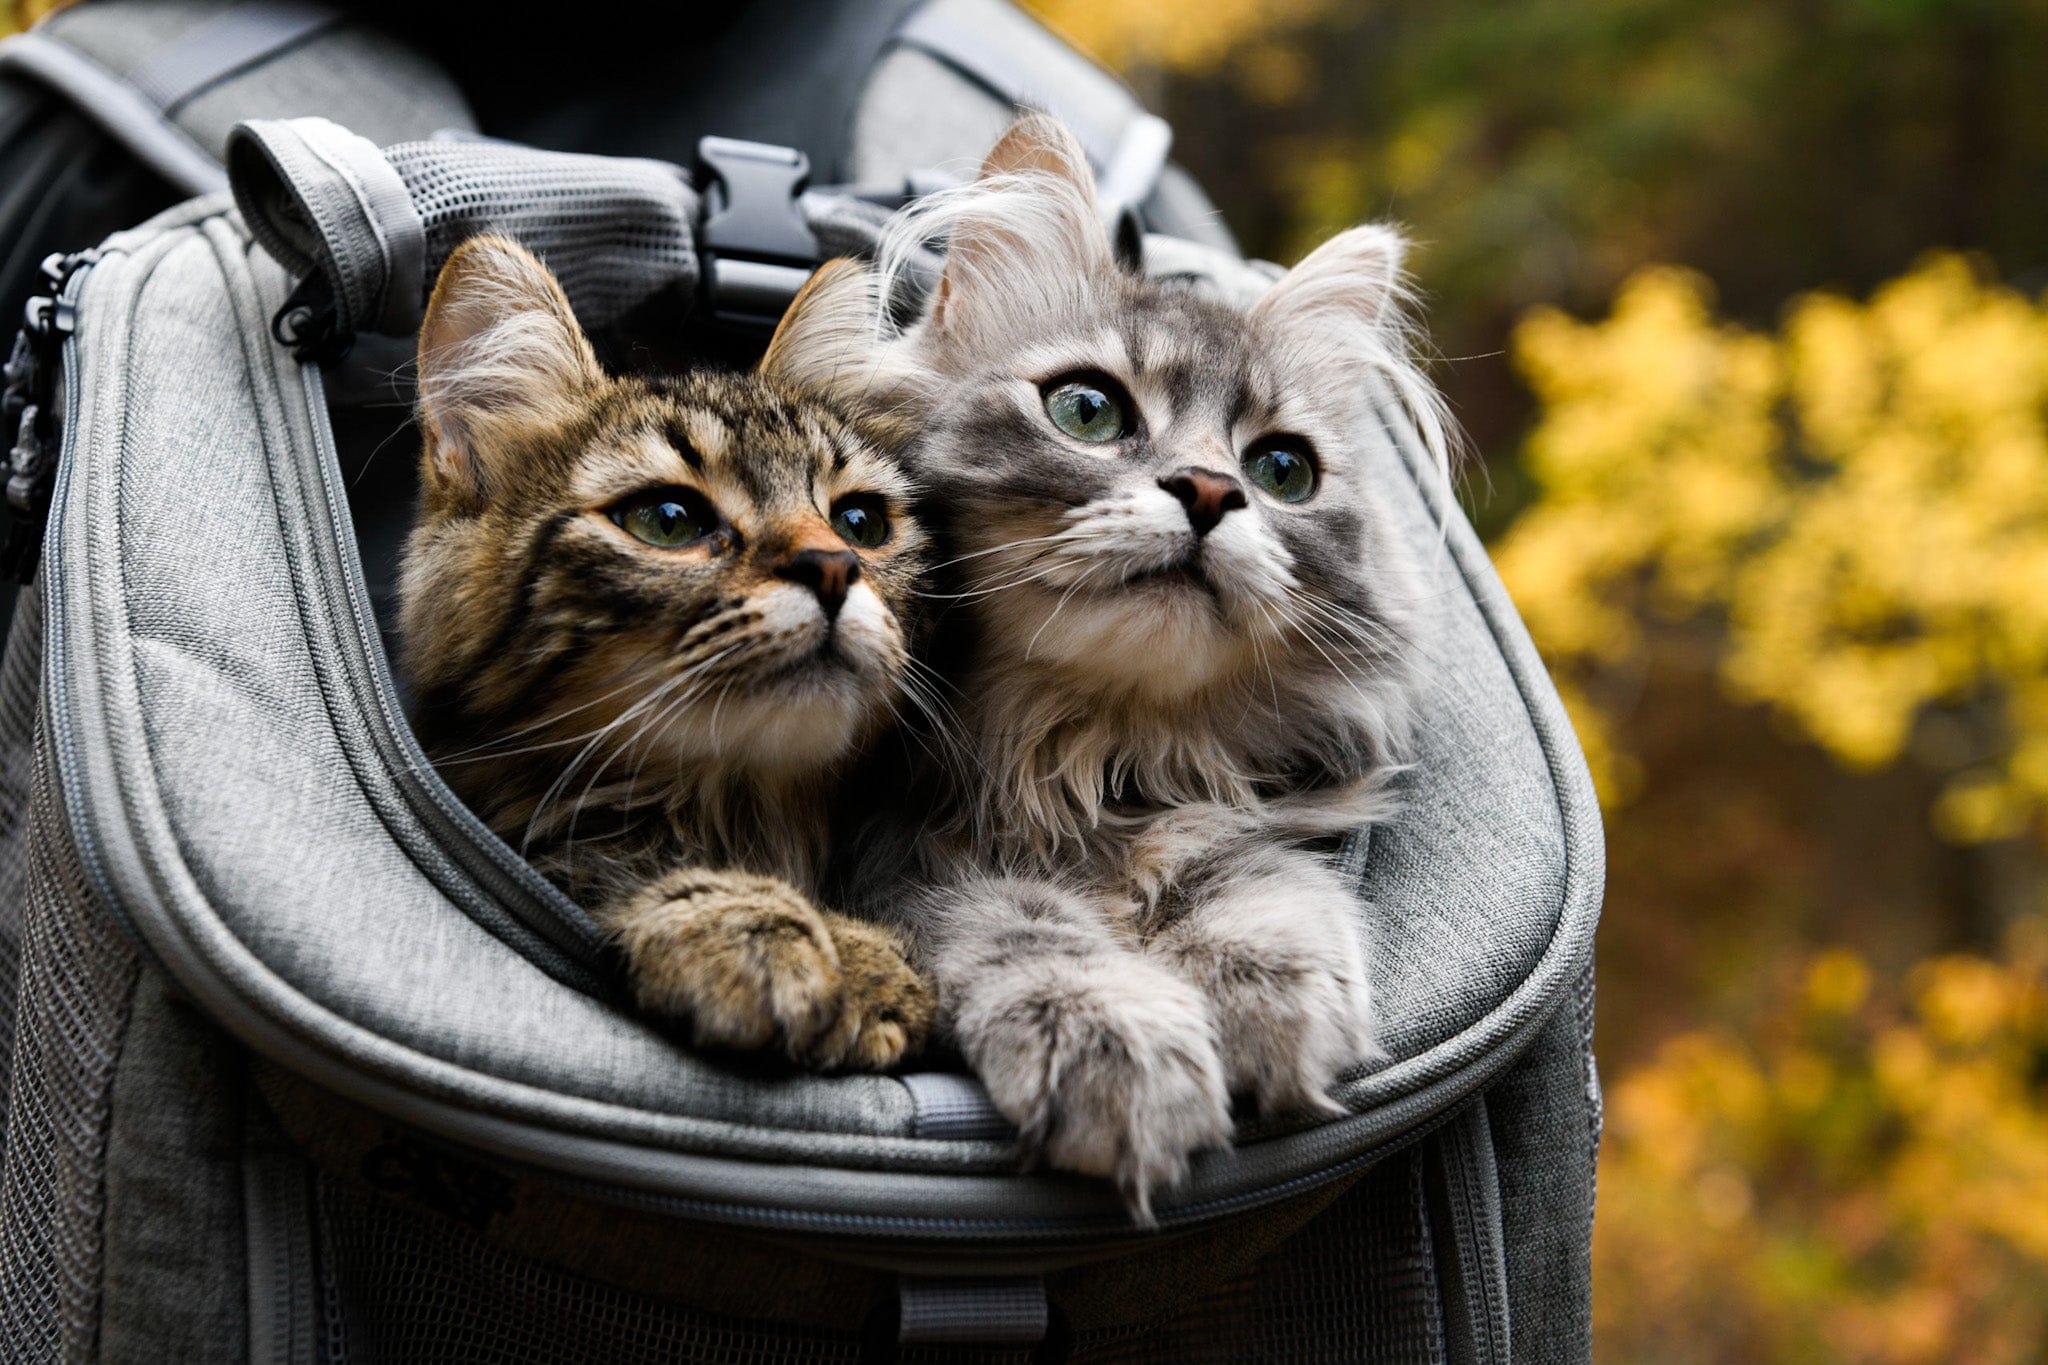 "The Navigator" Convertible Cat Backpack - For Adventurous Cats and Humans